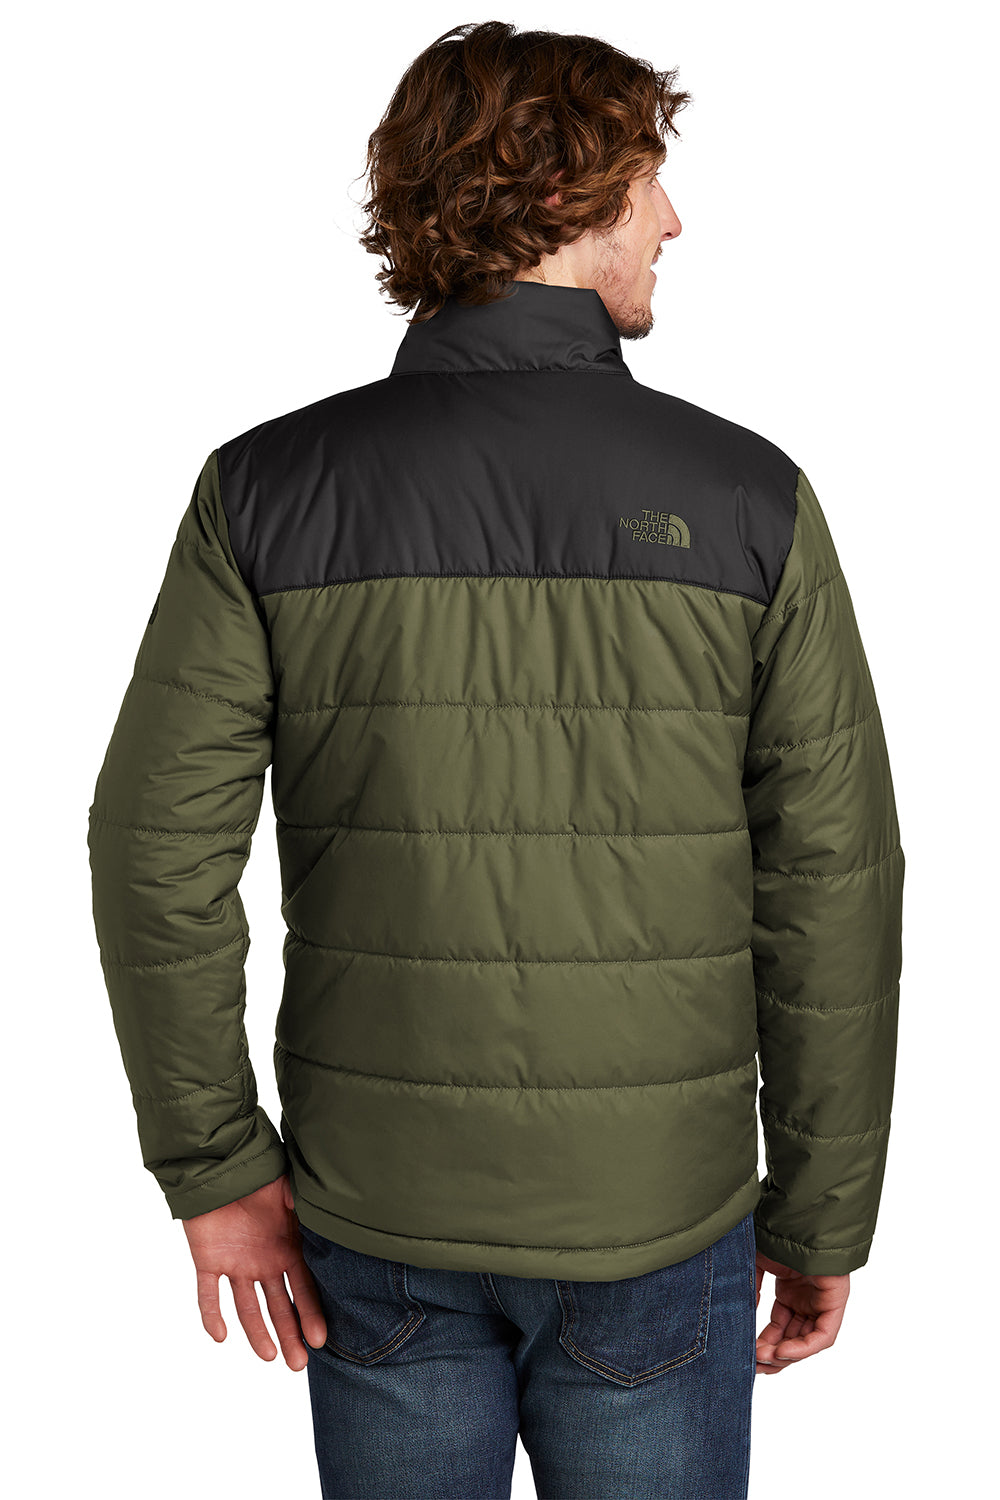 The North Face NF0A7V6J Mens Everyday Insulated Full Zip Jacket Burnt Olive Green Back